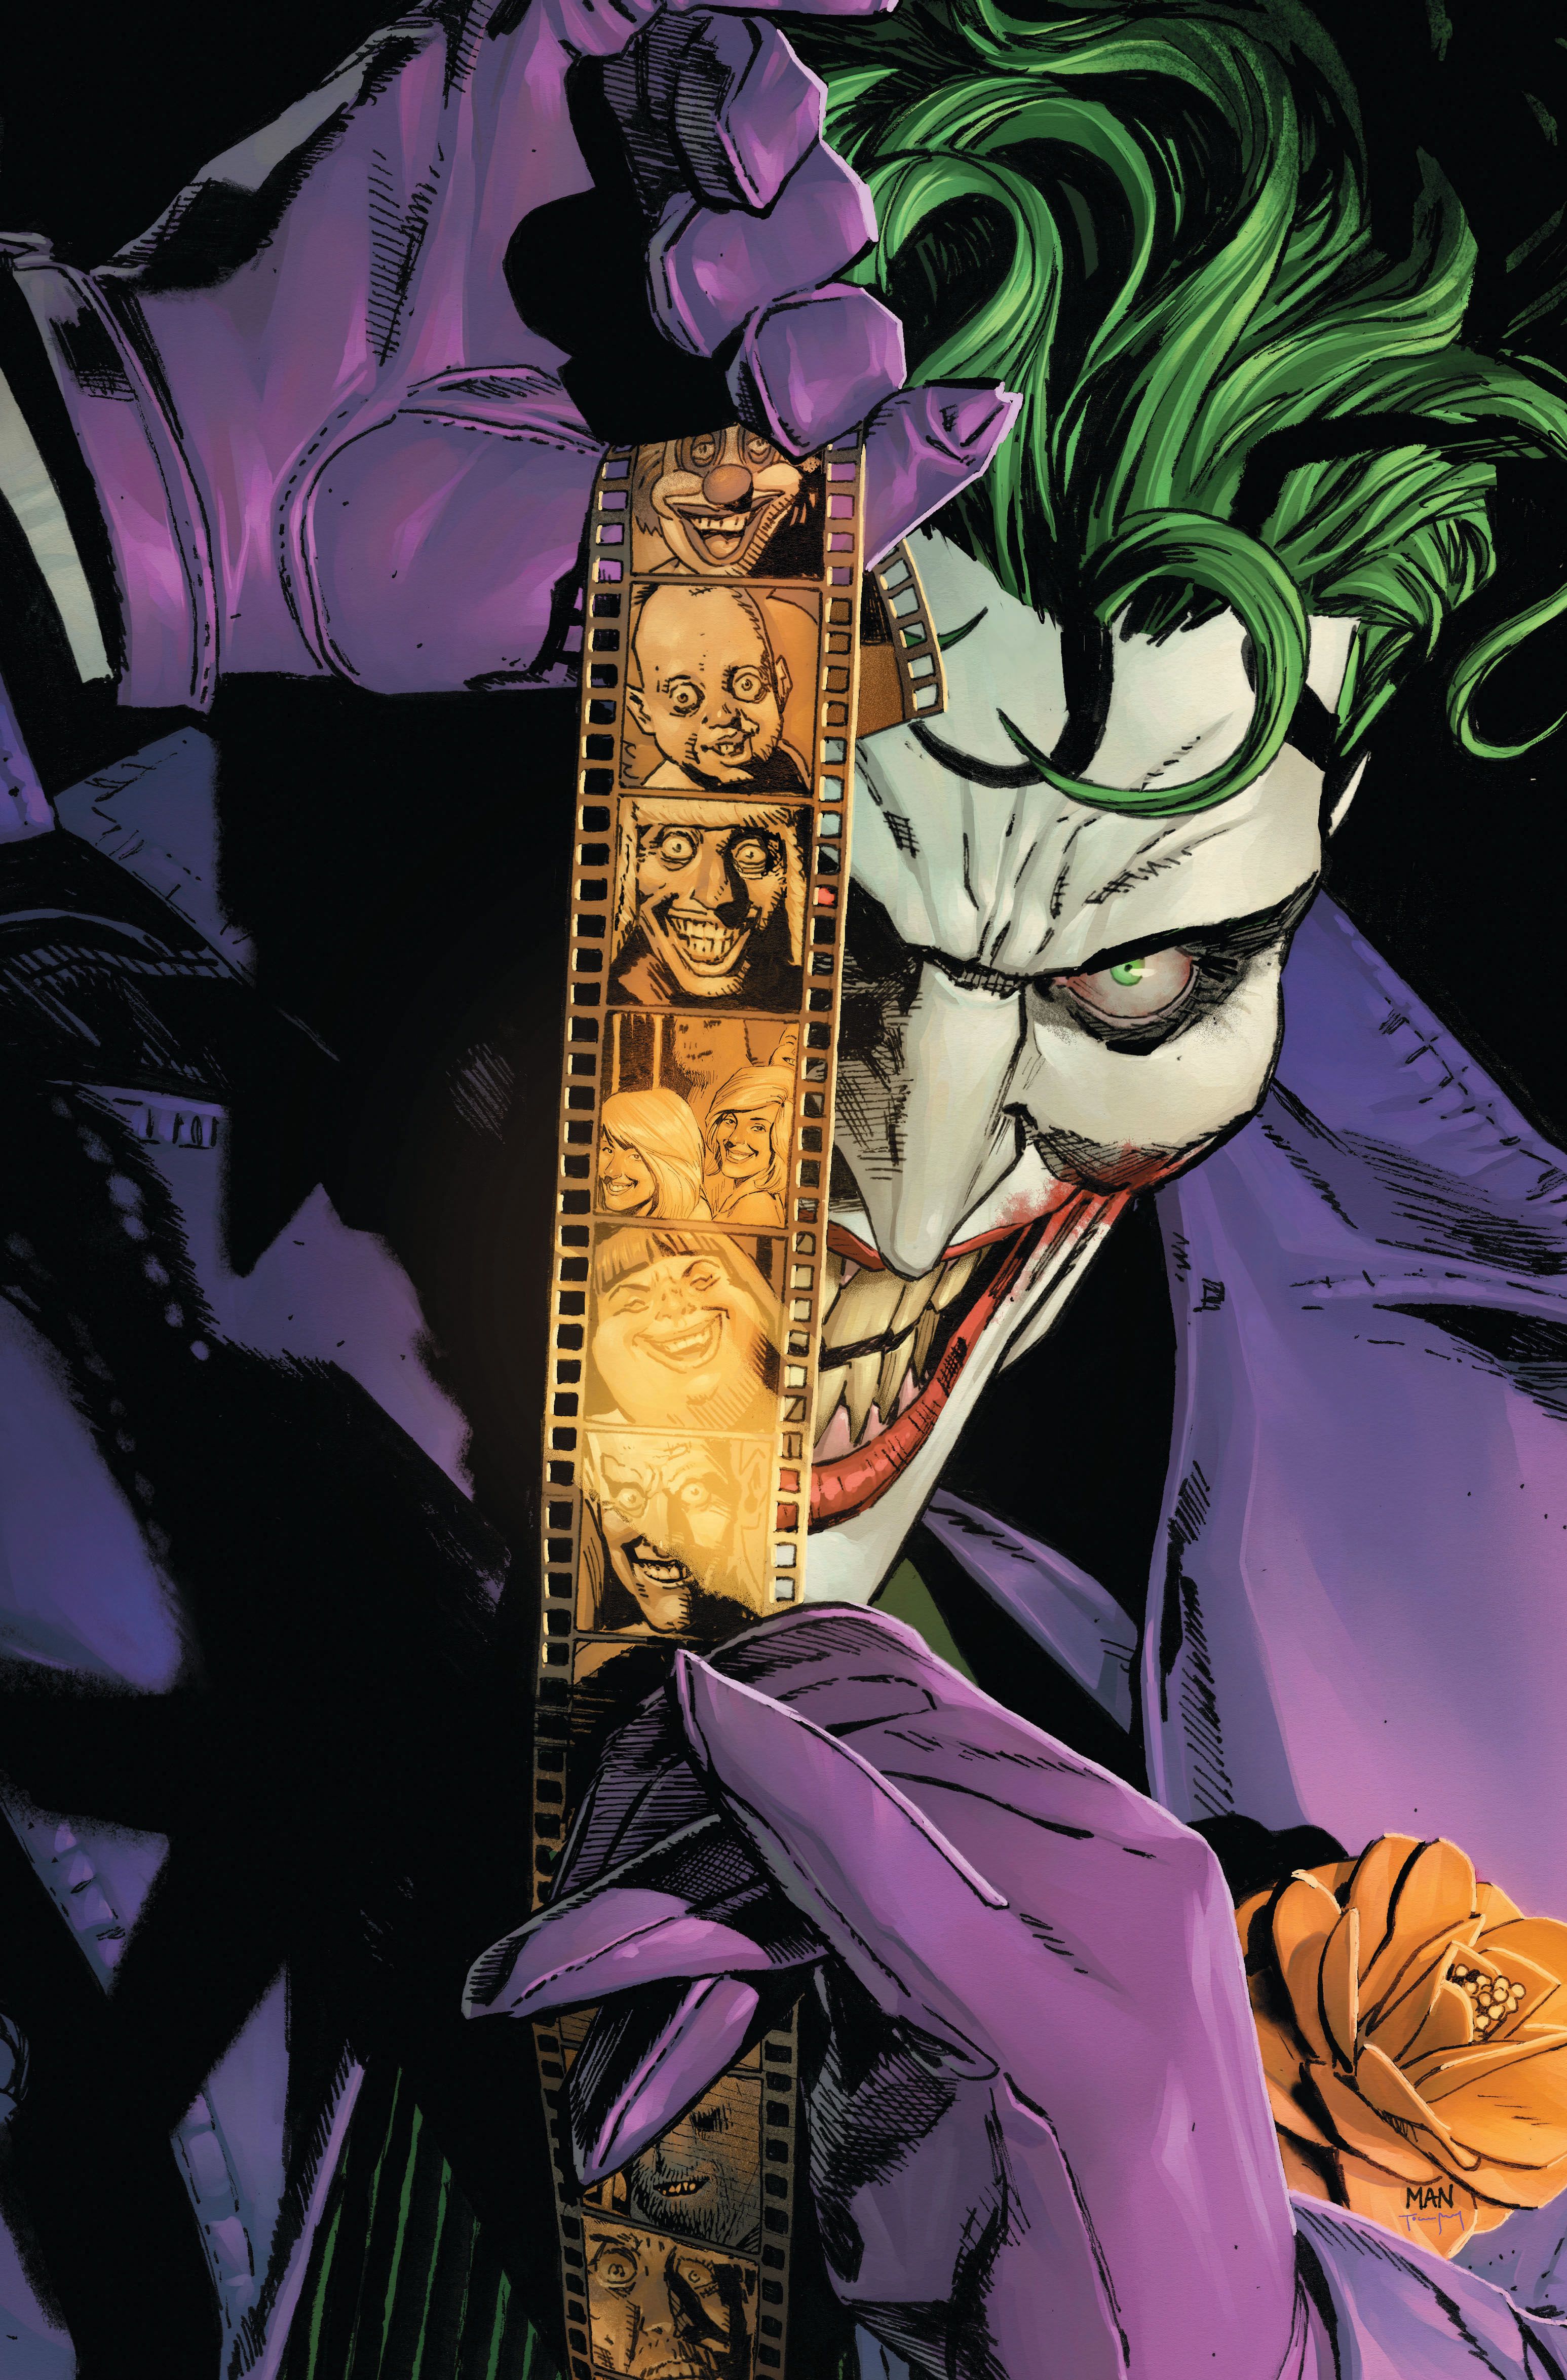 The Joker The Man Who Stopped Laughing 8 Open to Order Variant (Mann)